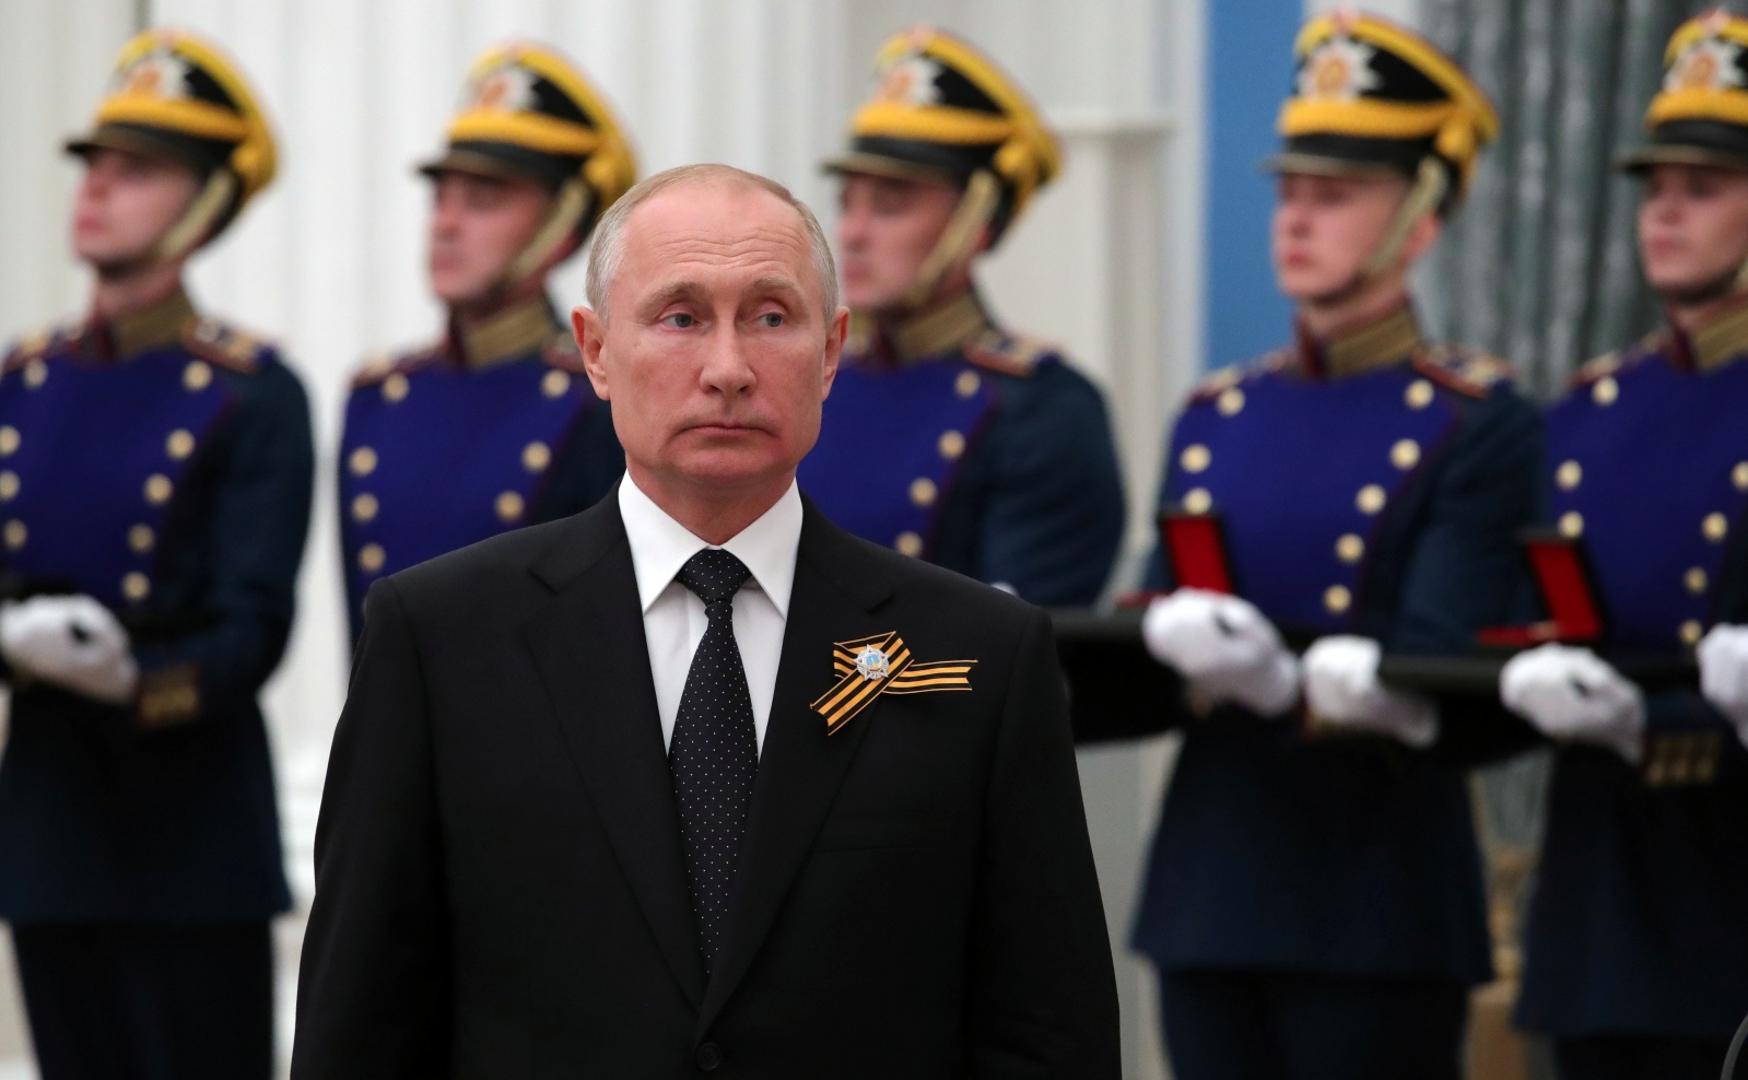 Russia's President Putin attends an awarding ceremony in Moscow Russia's President Vladimir Putin attends an awarding ceremony at the Kremlin in Moscow, Russia June 24, 2020. Sputnik/Mikhail Klimentyev/Kremlin via REUTERS ATTENTION EDITORS - THIS IMAGE WAS PROVIDED BY A THIRD PARTY. SPUTNIK